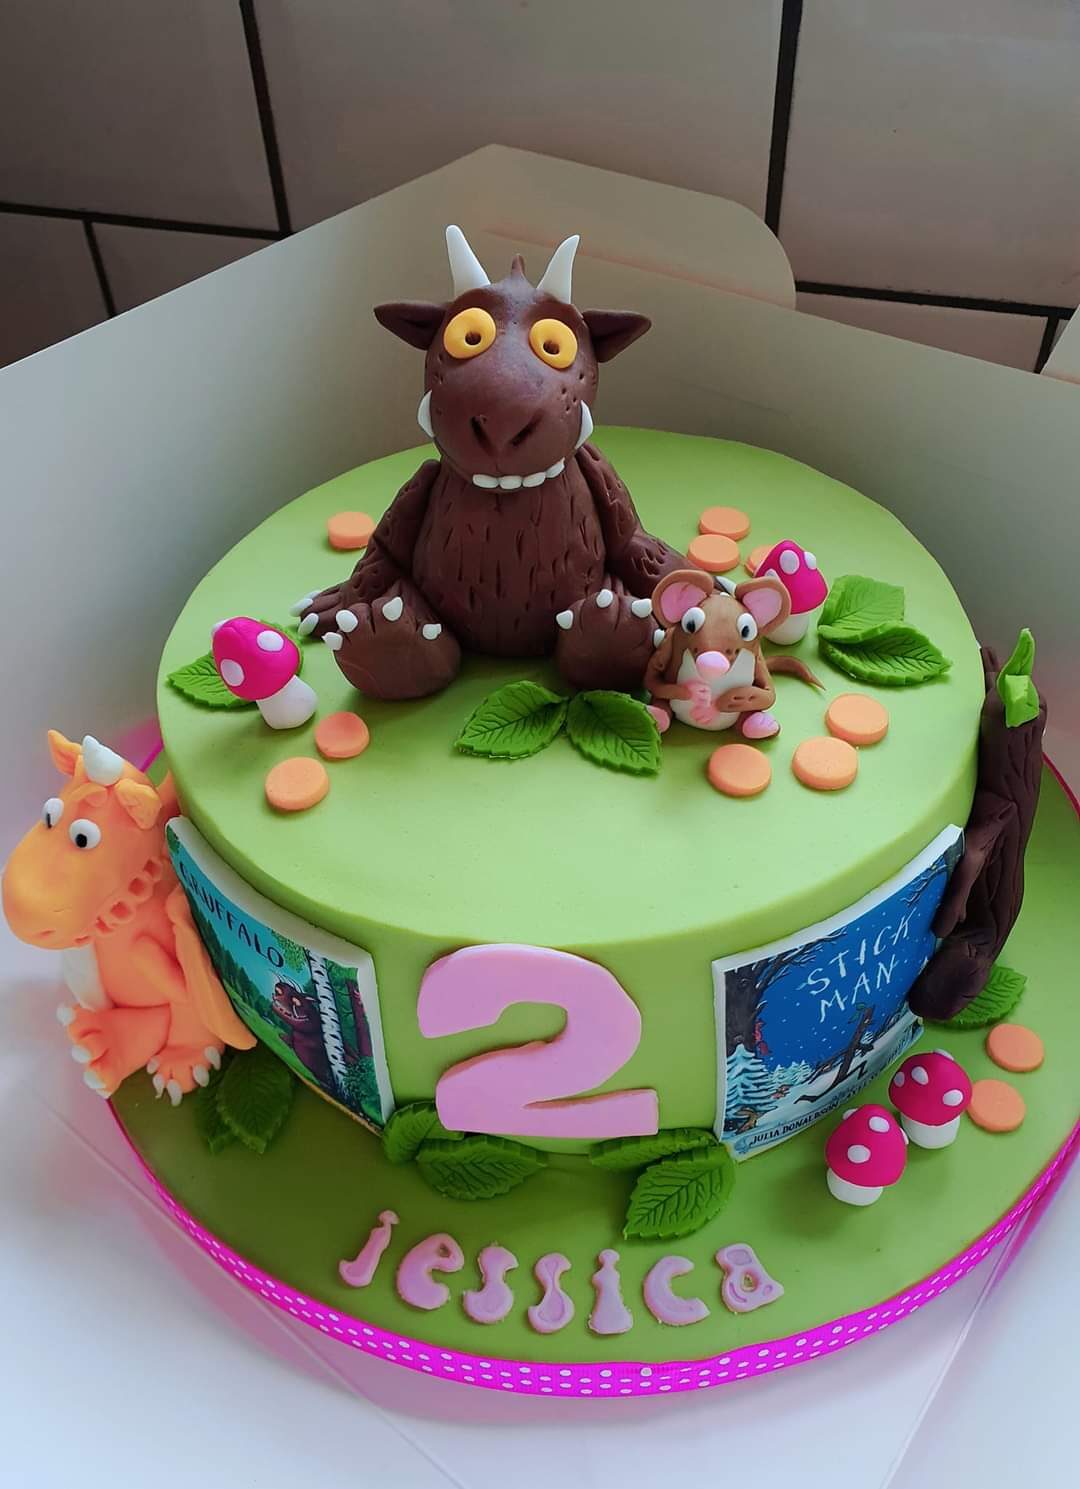 4 bakeries perfect for children's birthday cakes